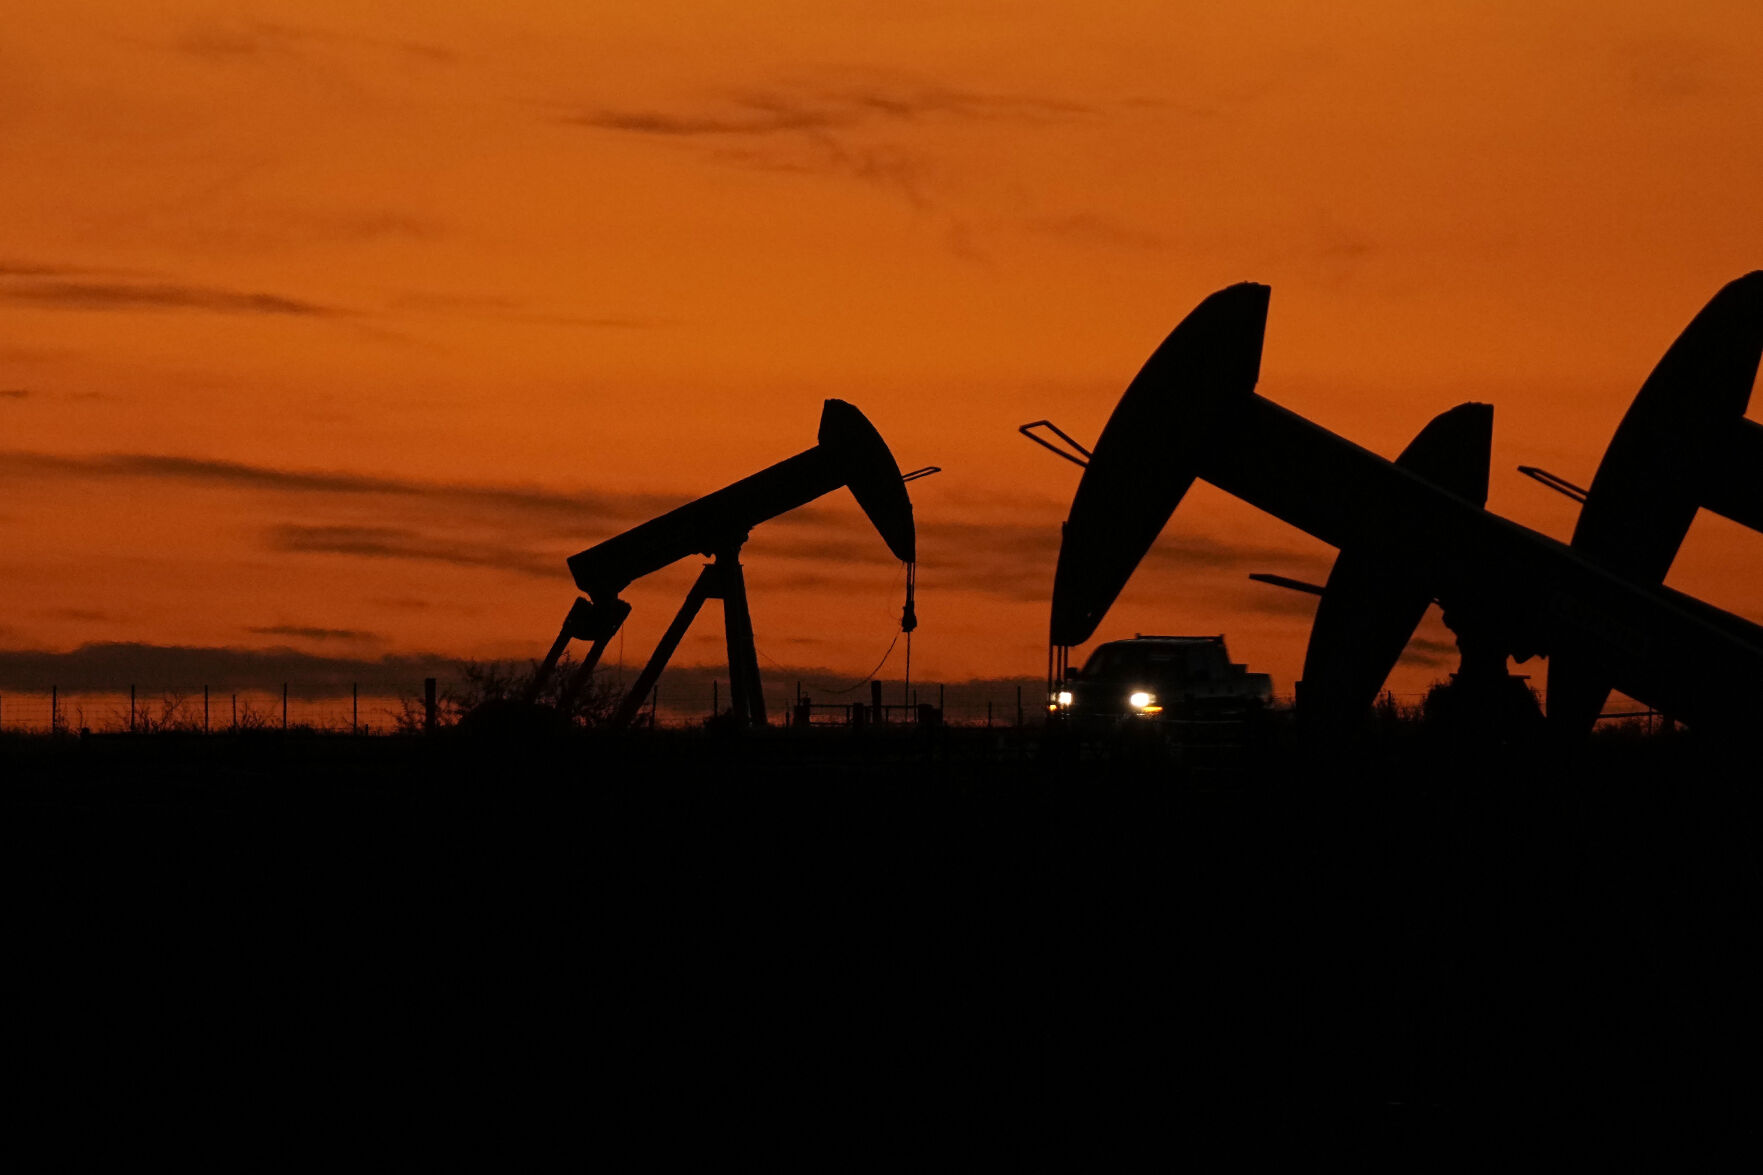 <p>File - A truck passes oil pump jacks at dusk near Karnes City, Texas, Wednesday, Nov. 1, 2023. On Wednesday, the Commerce Department issues its second of three estimates of how the U.S. economy performed in the third quarter of 2023. (AP Photo/Eric Gay, File)</p>   PHOTO CREDIT: Eric Gay